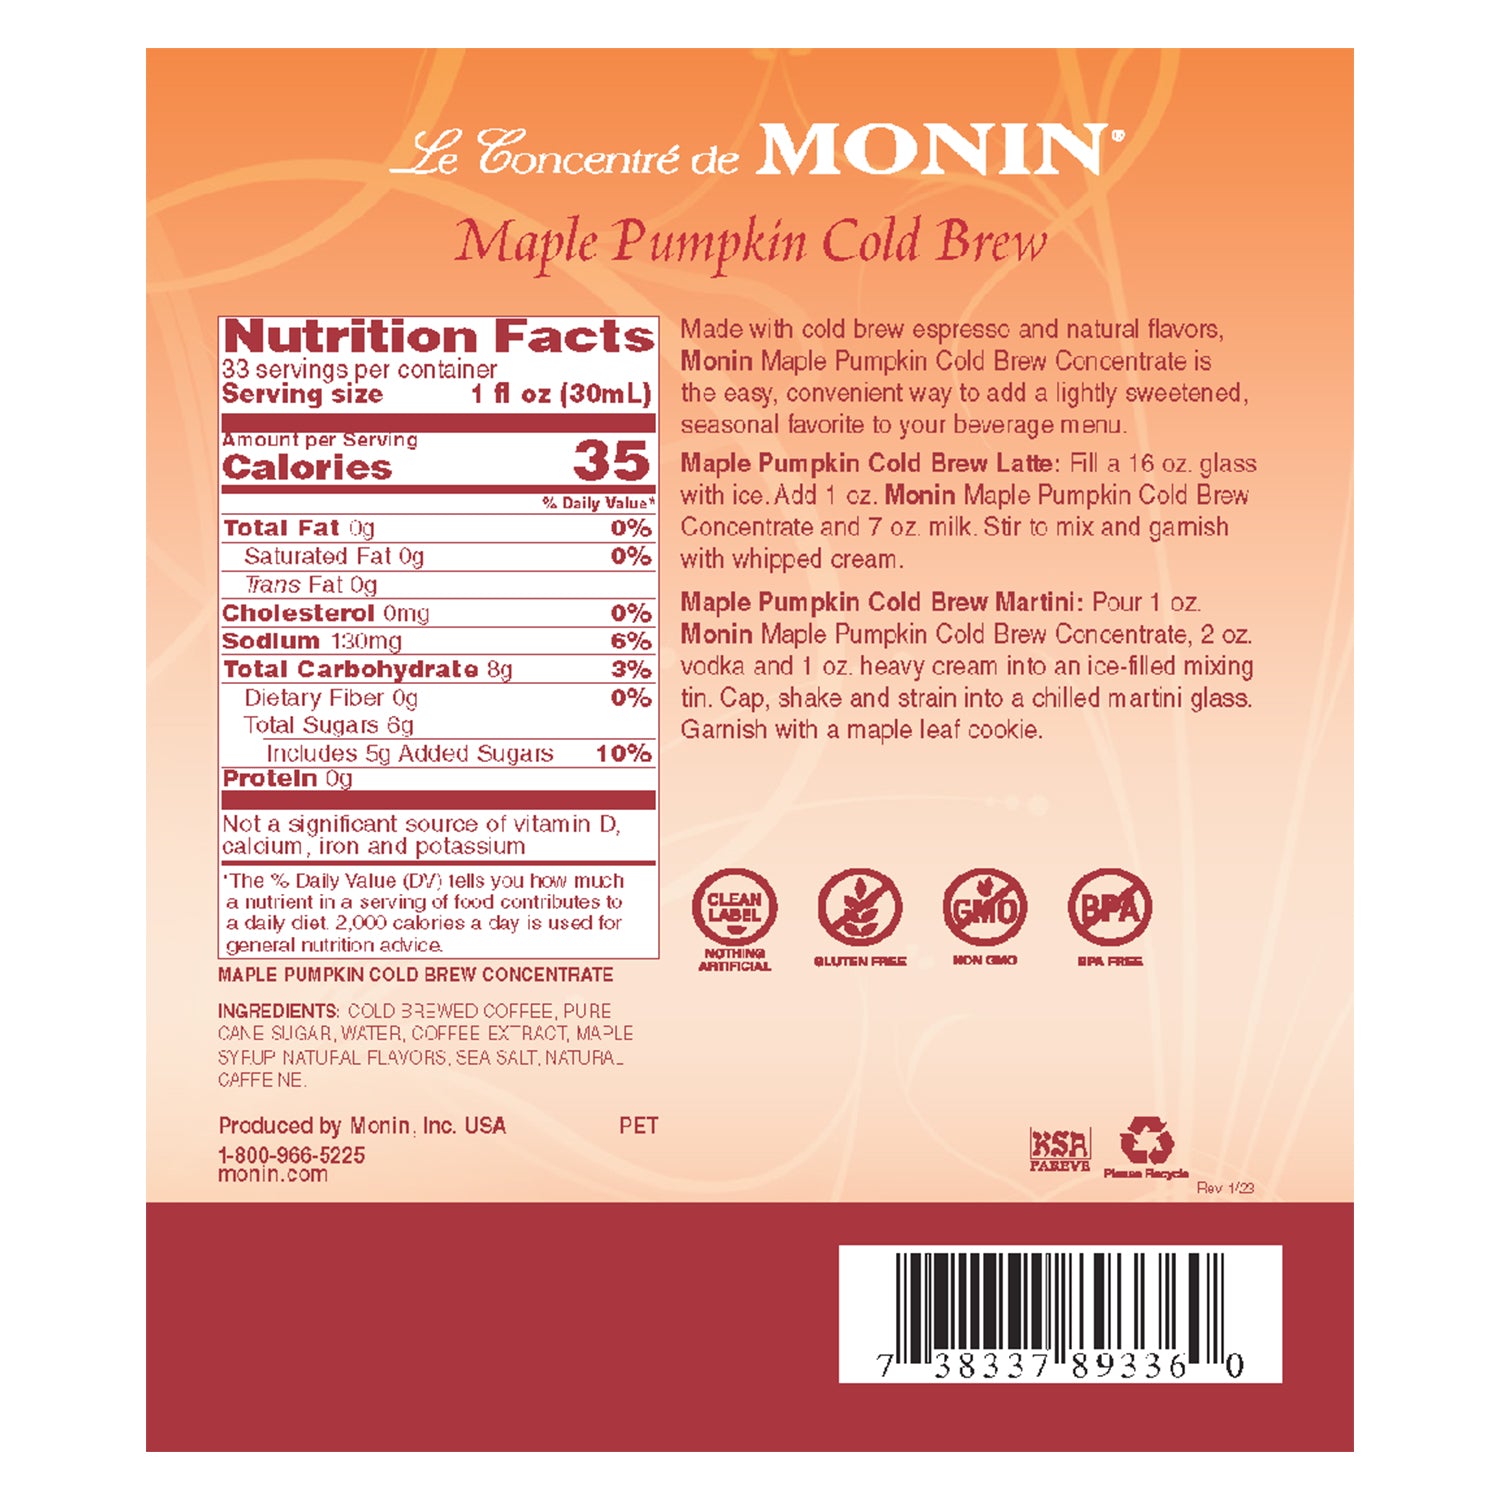 Monin Maple Pumpkin Cold Brew Concentrate nutrition facts and directions label